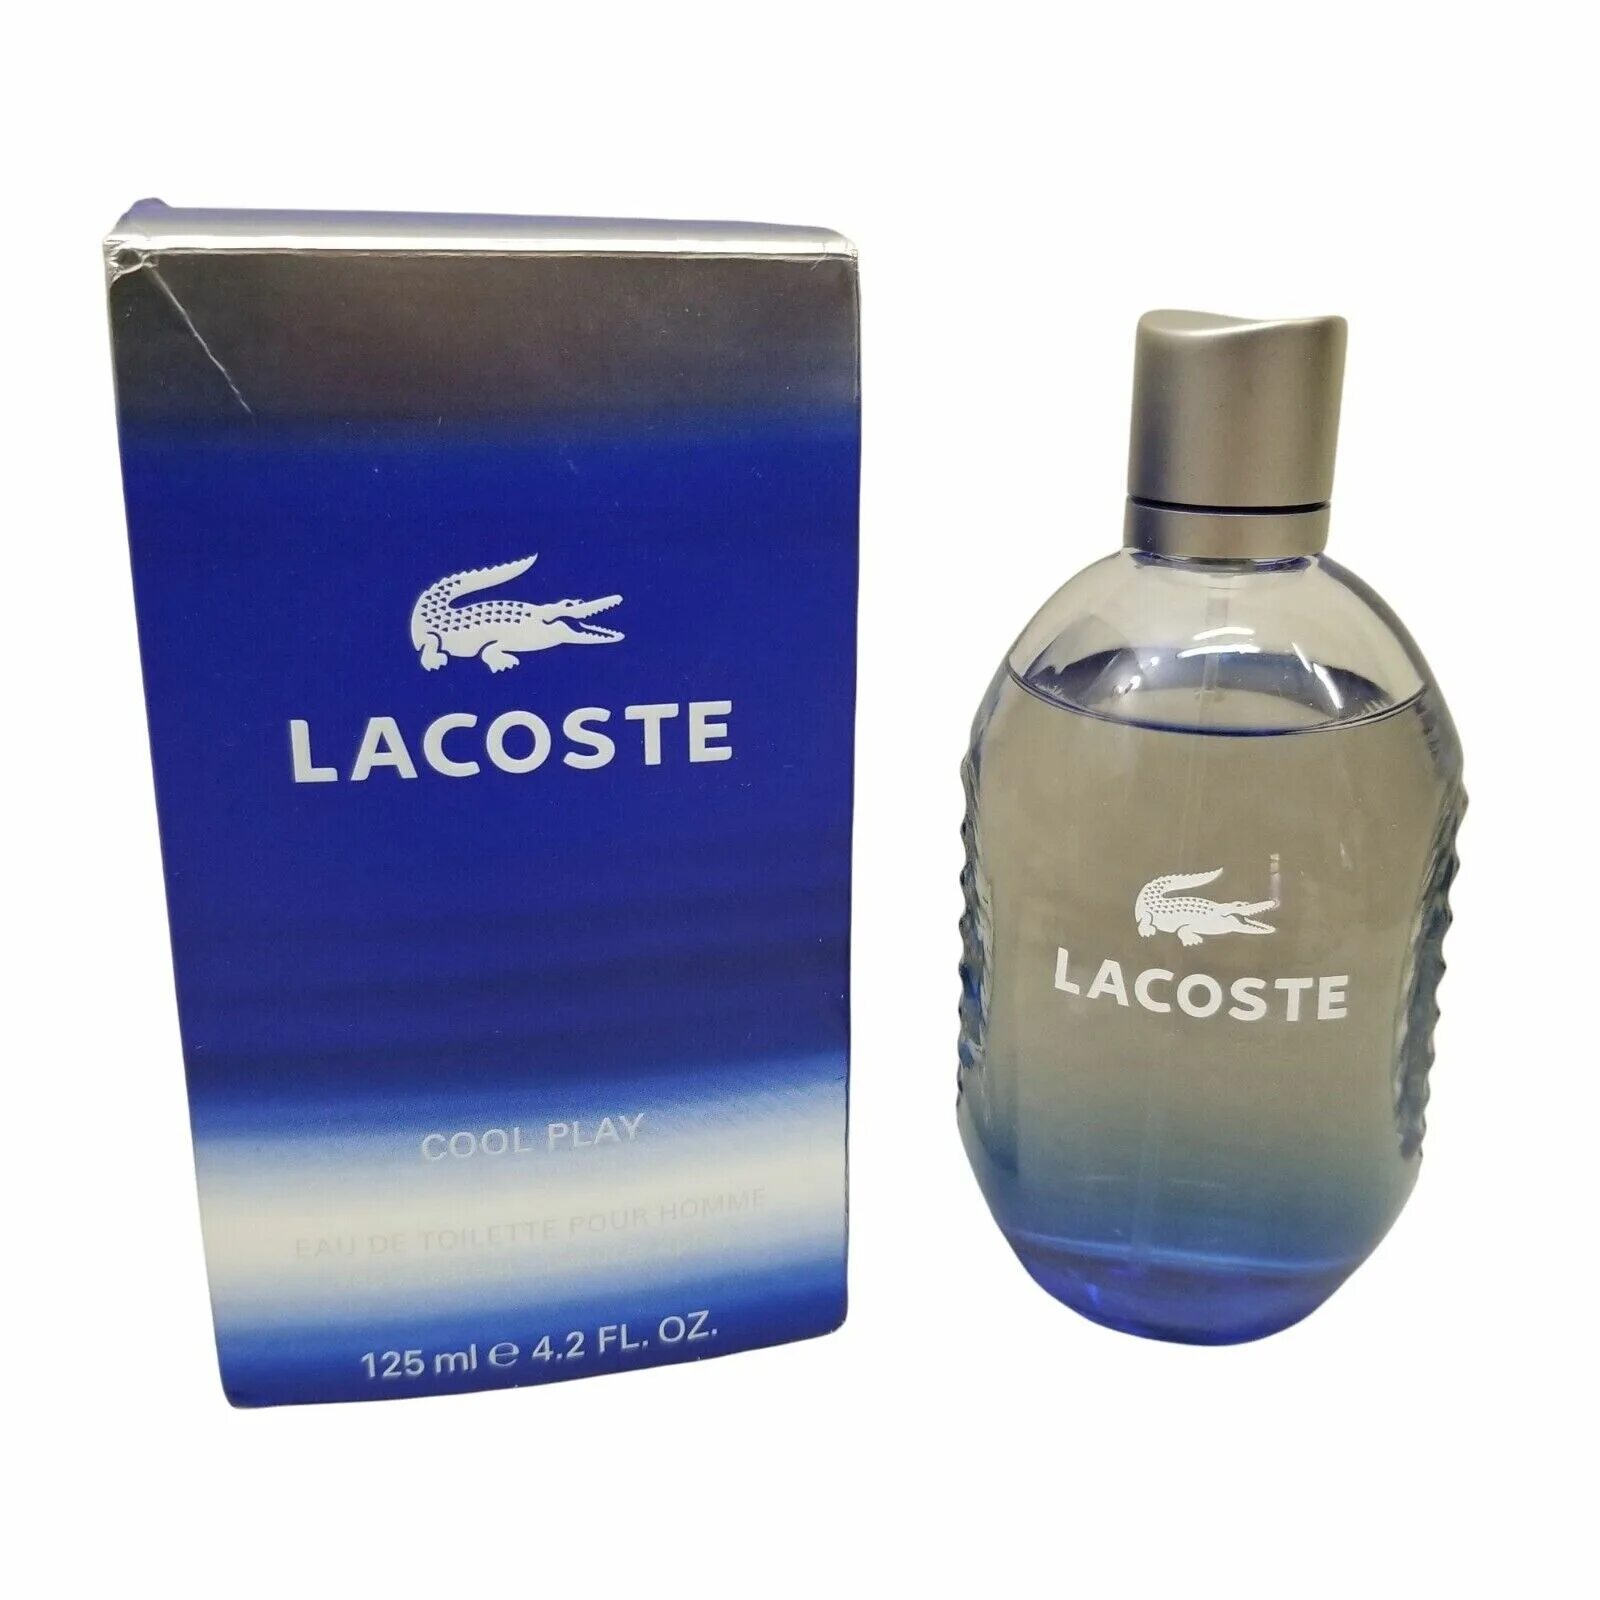 Lacoste natural. Lacoste cool Play 125 ml. Лакоста кул плей 125 мл. L-002 Style in Play Lacoste. Lacoste cool Play летуаль.